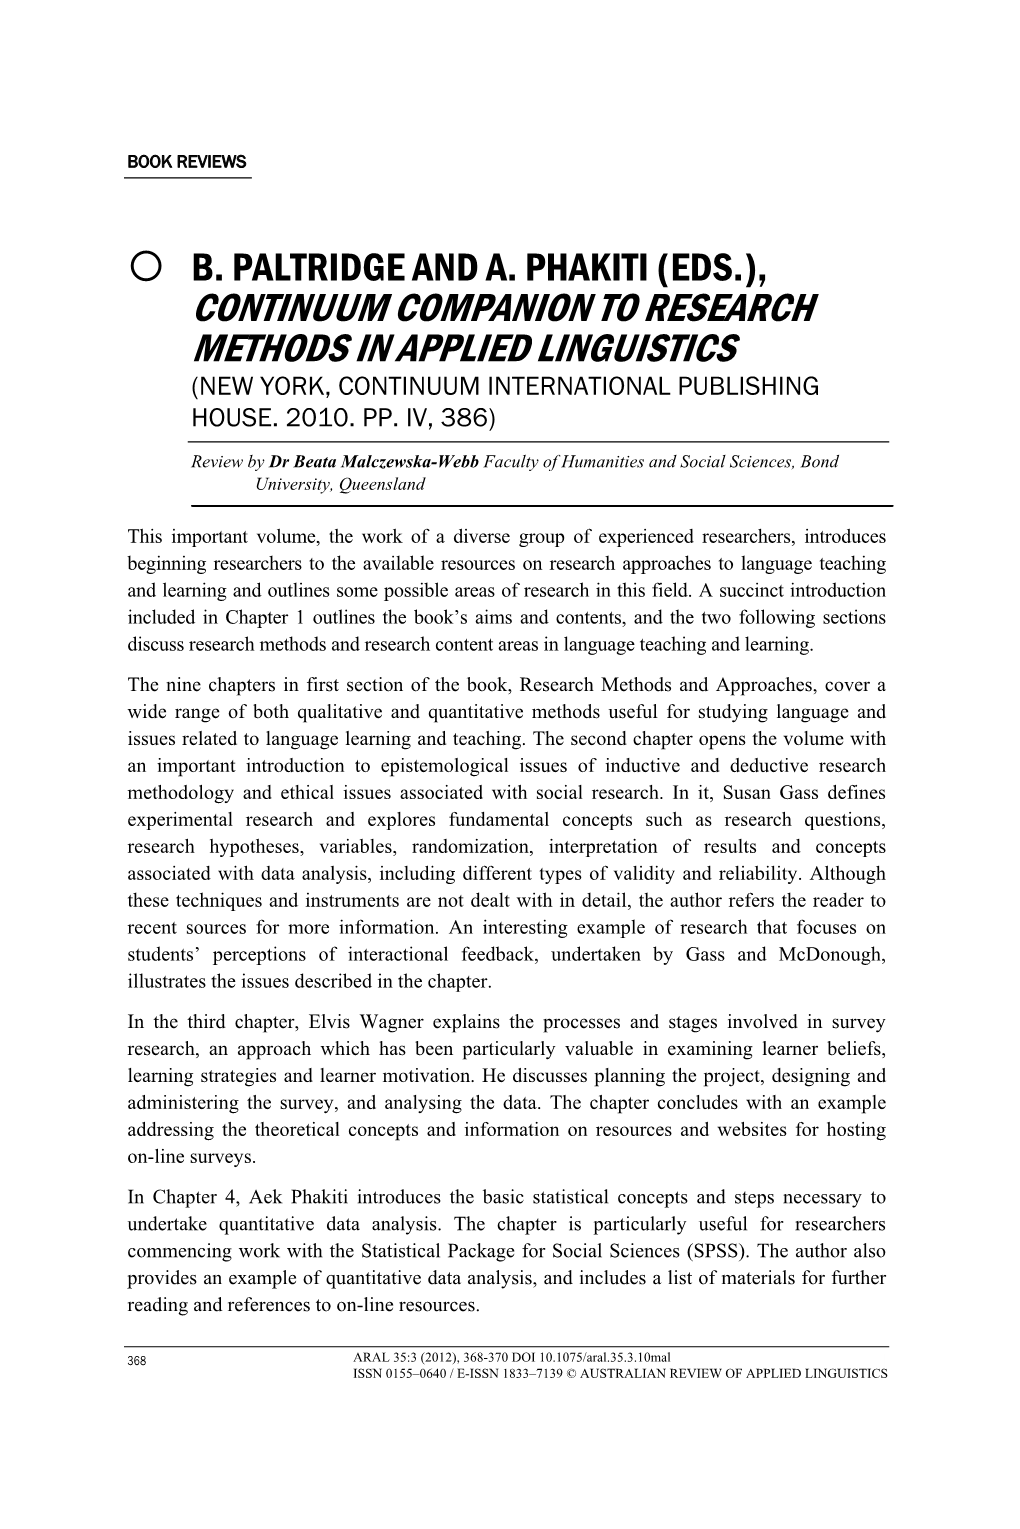 Continuum Companion to Research Methods in Applied Linguistics (New York, Continuum International Publishing House